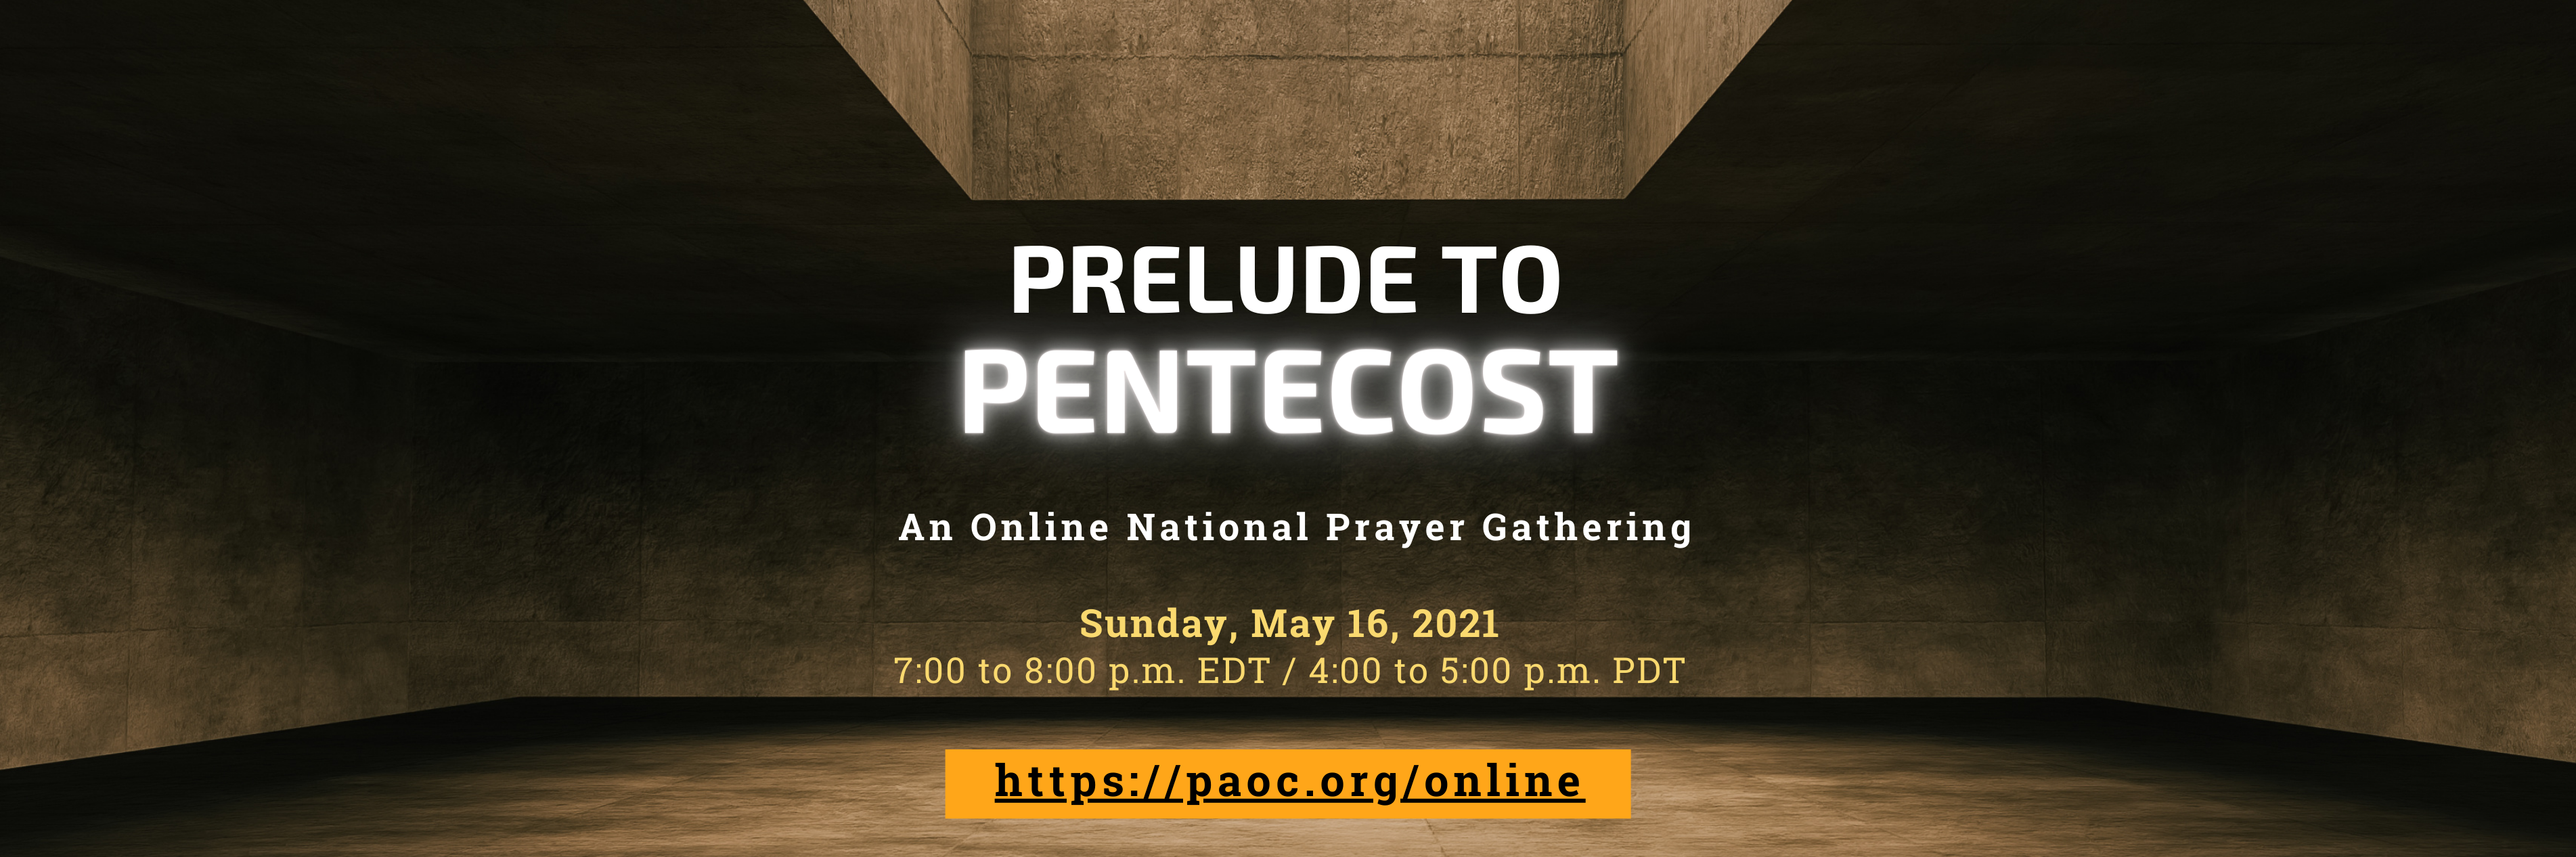 Banner for the 'Prelude to Pentecost' event being hosted online at paoc.org/online on Say May 16 2021 from 7 to 8 pm EDT